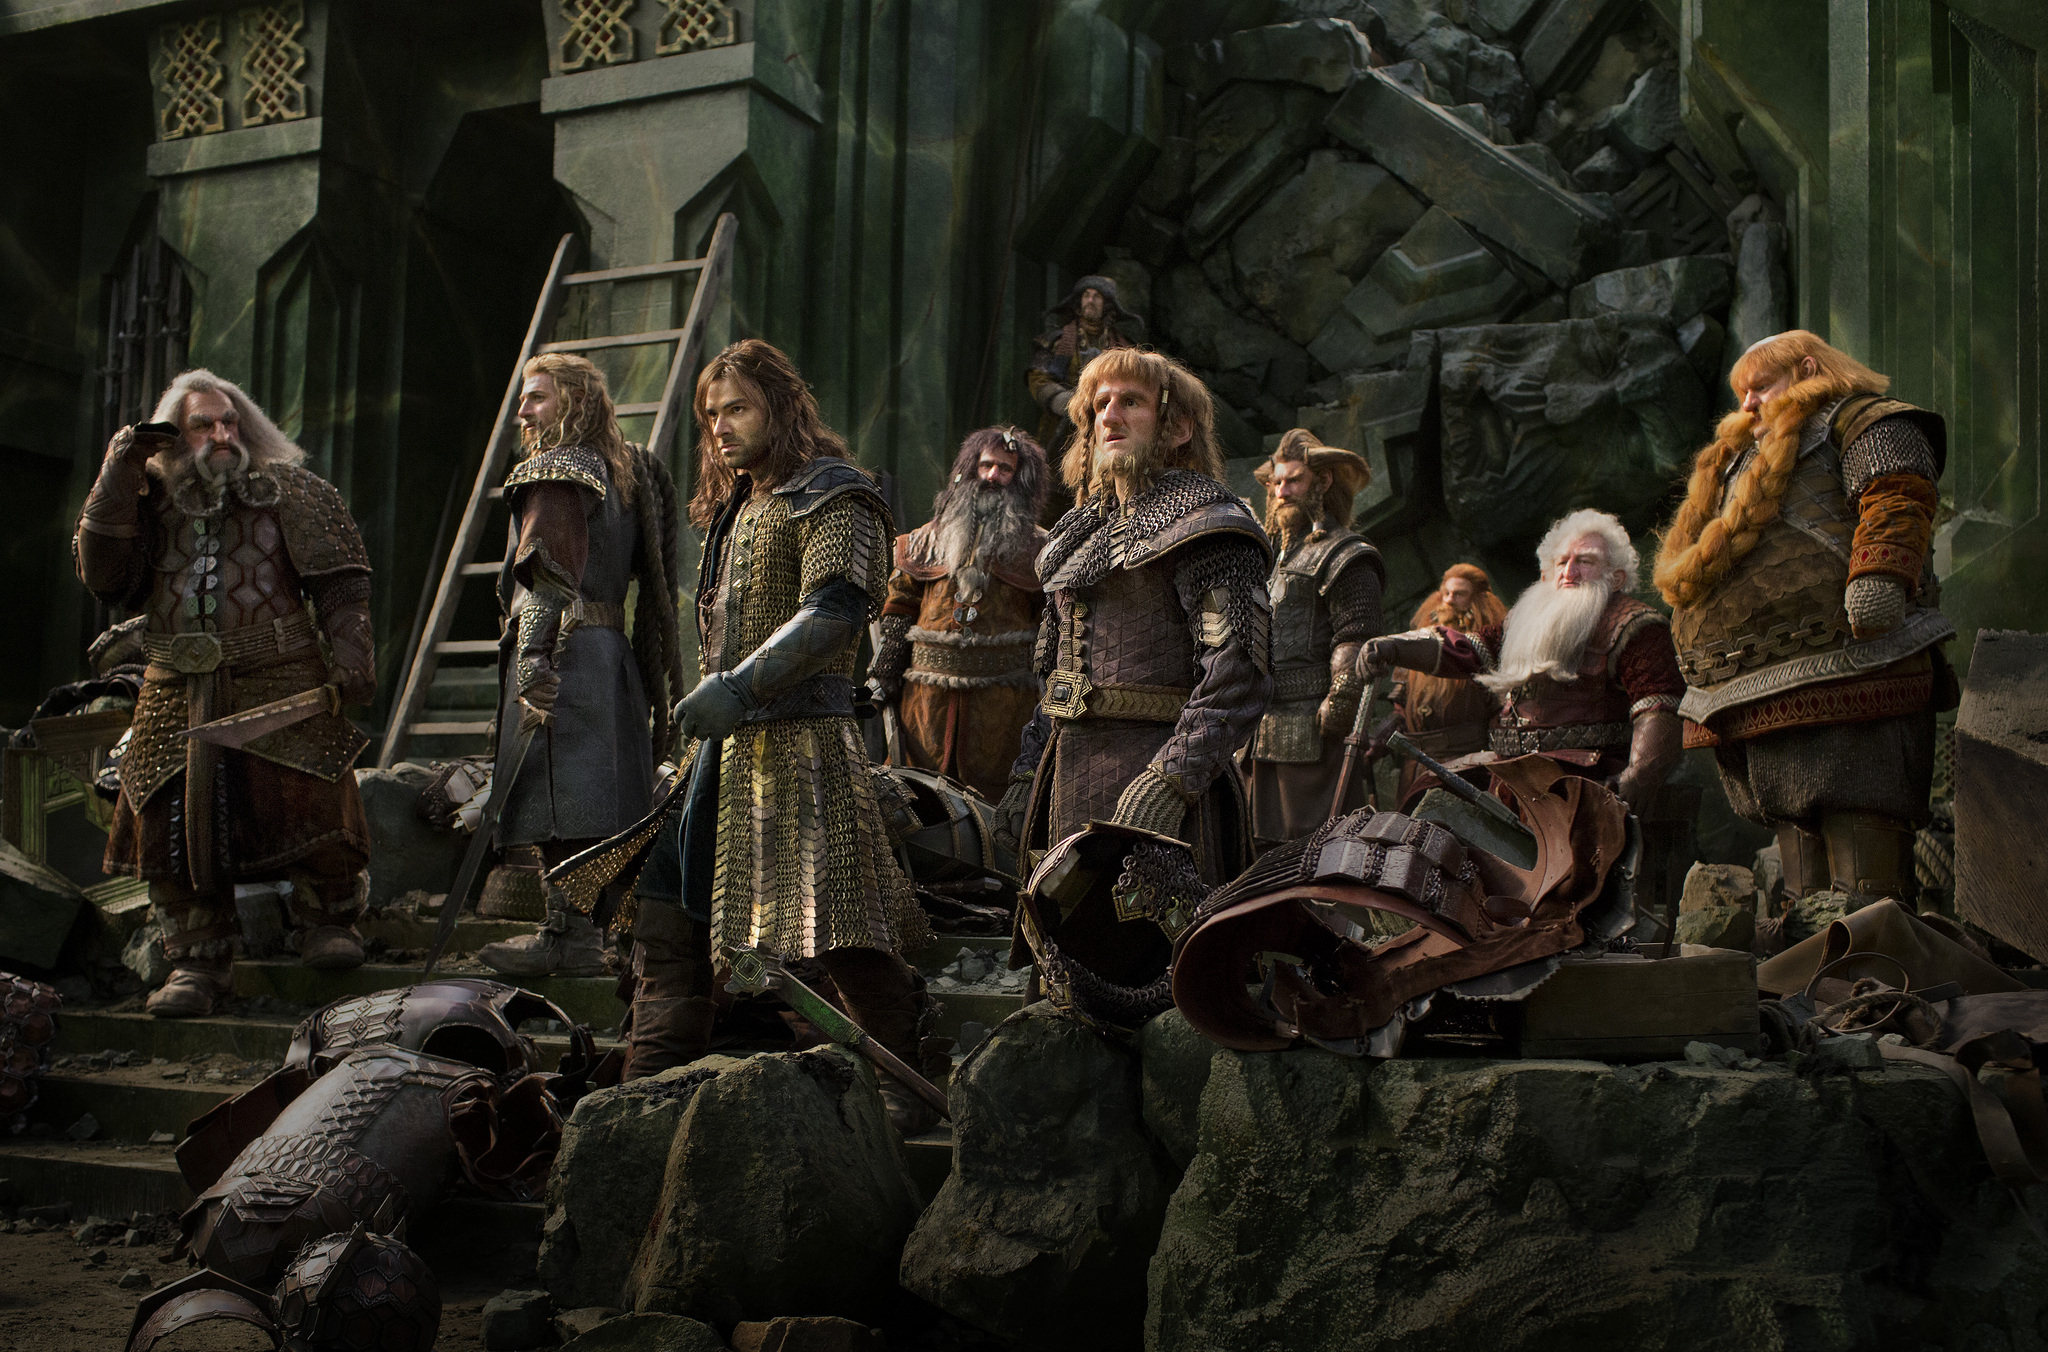 The Hobbit 3: The Battle of the Five Armies / The Hobbit 3: The Battle of the Five Armies (2014)